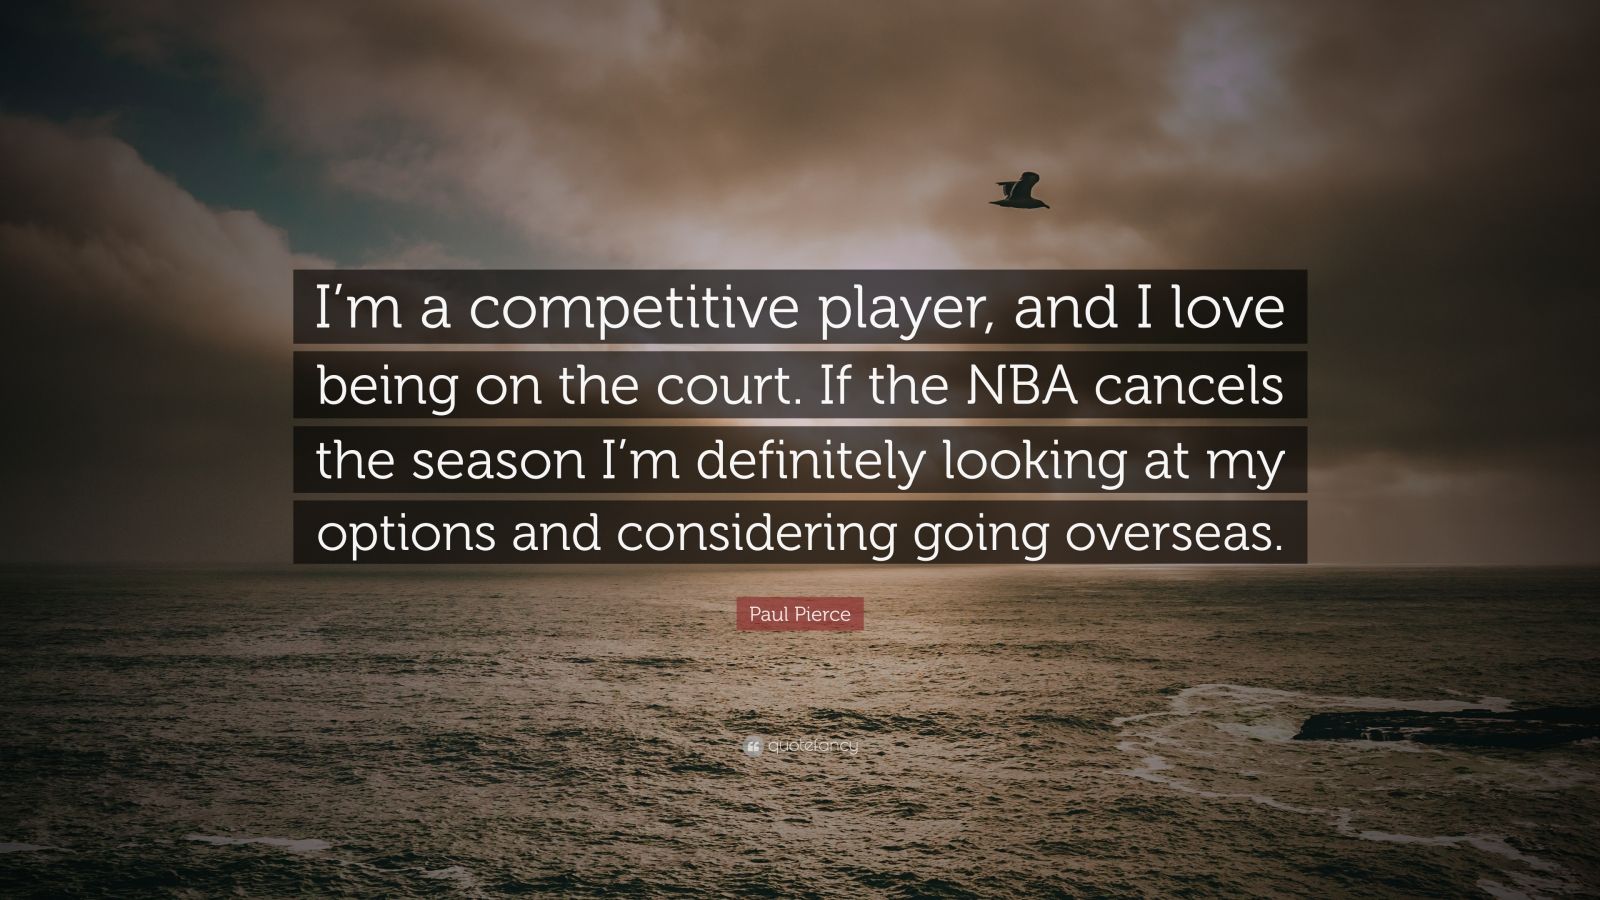 Paul Pierce Quote: "I'm a competitive player, and I love being on the court. If the NBA cancels ...